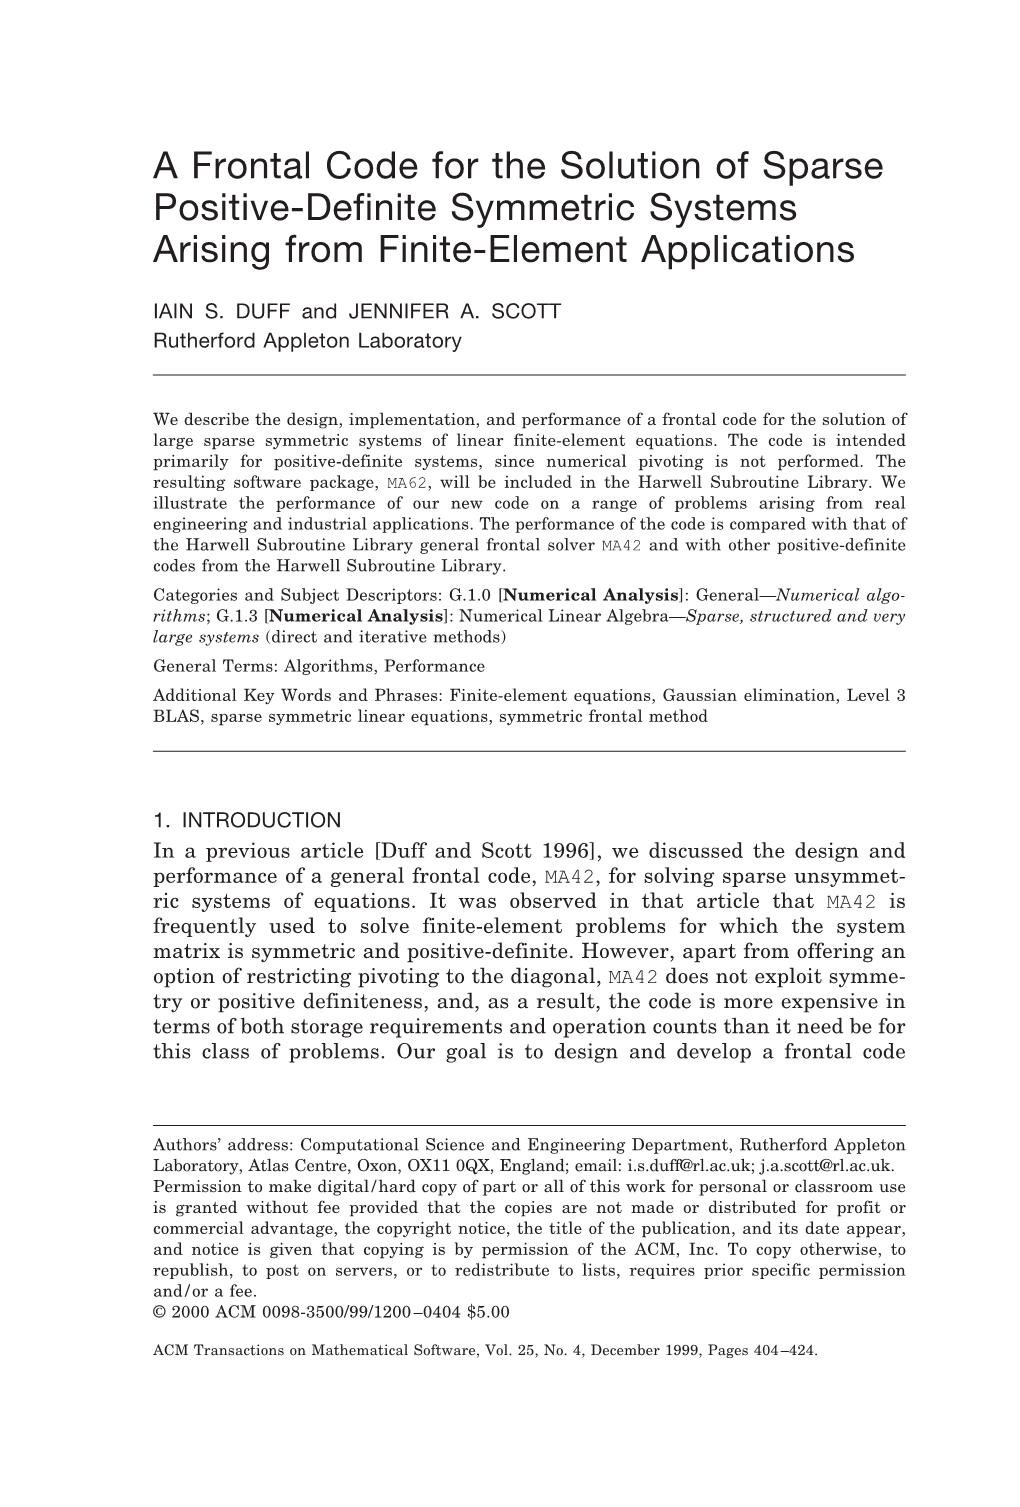 A Frontal Code for the Solution of Sparse Positive-Definite Symmetric Systems Arising from Finite-Element Applications